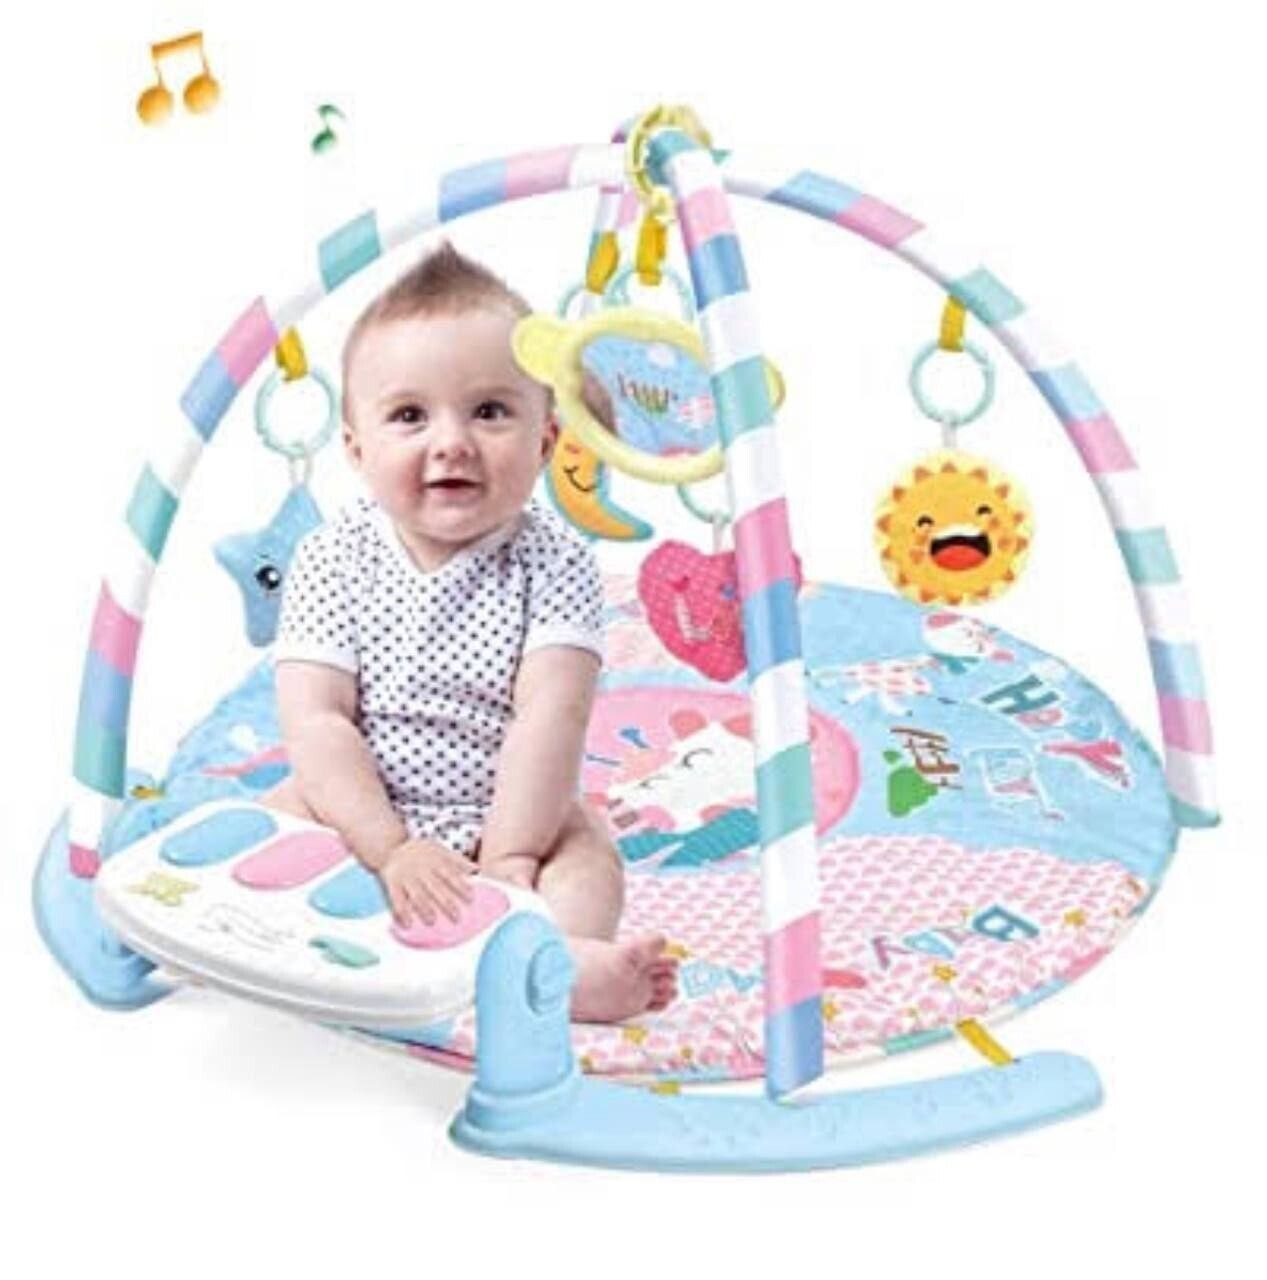 Baby Piano Fitness Play Gym Mat Educational Activity